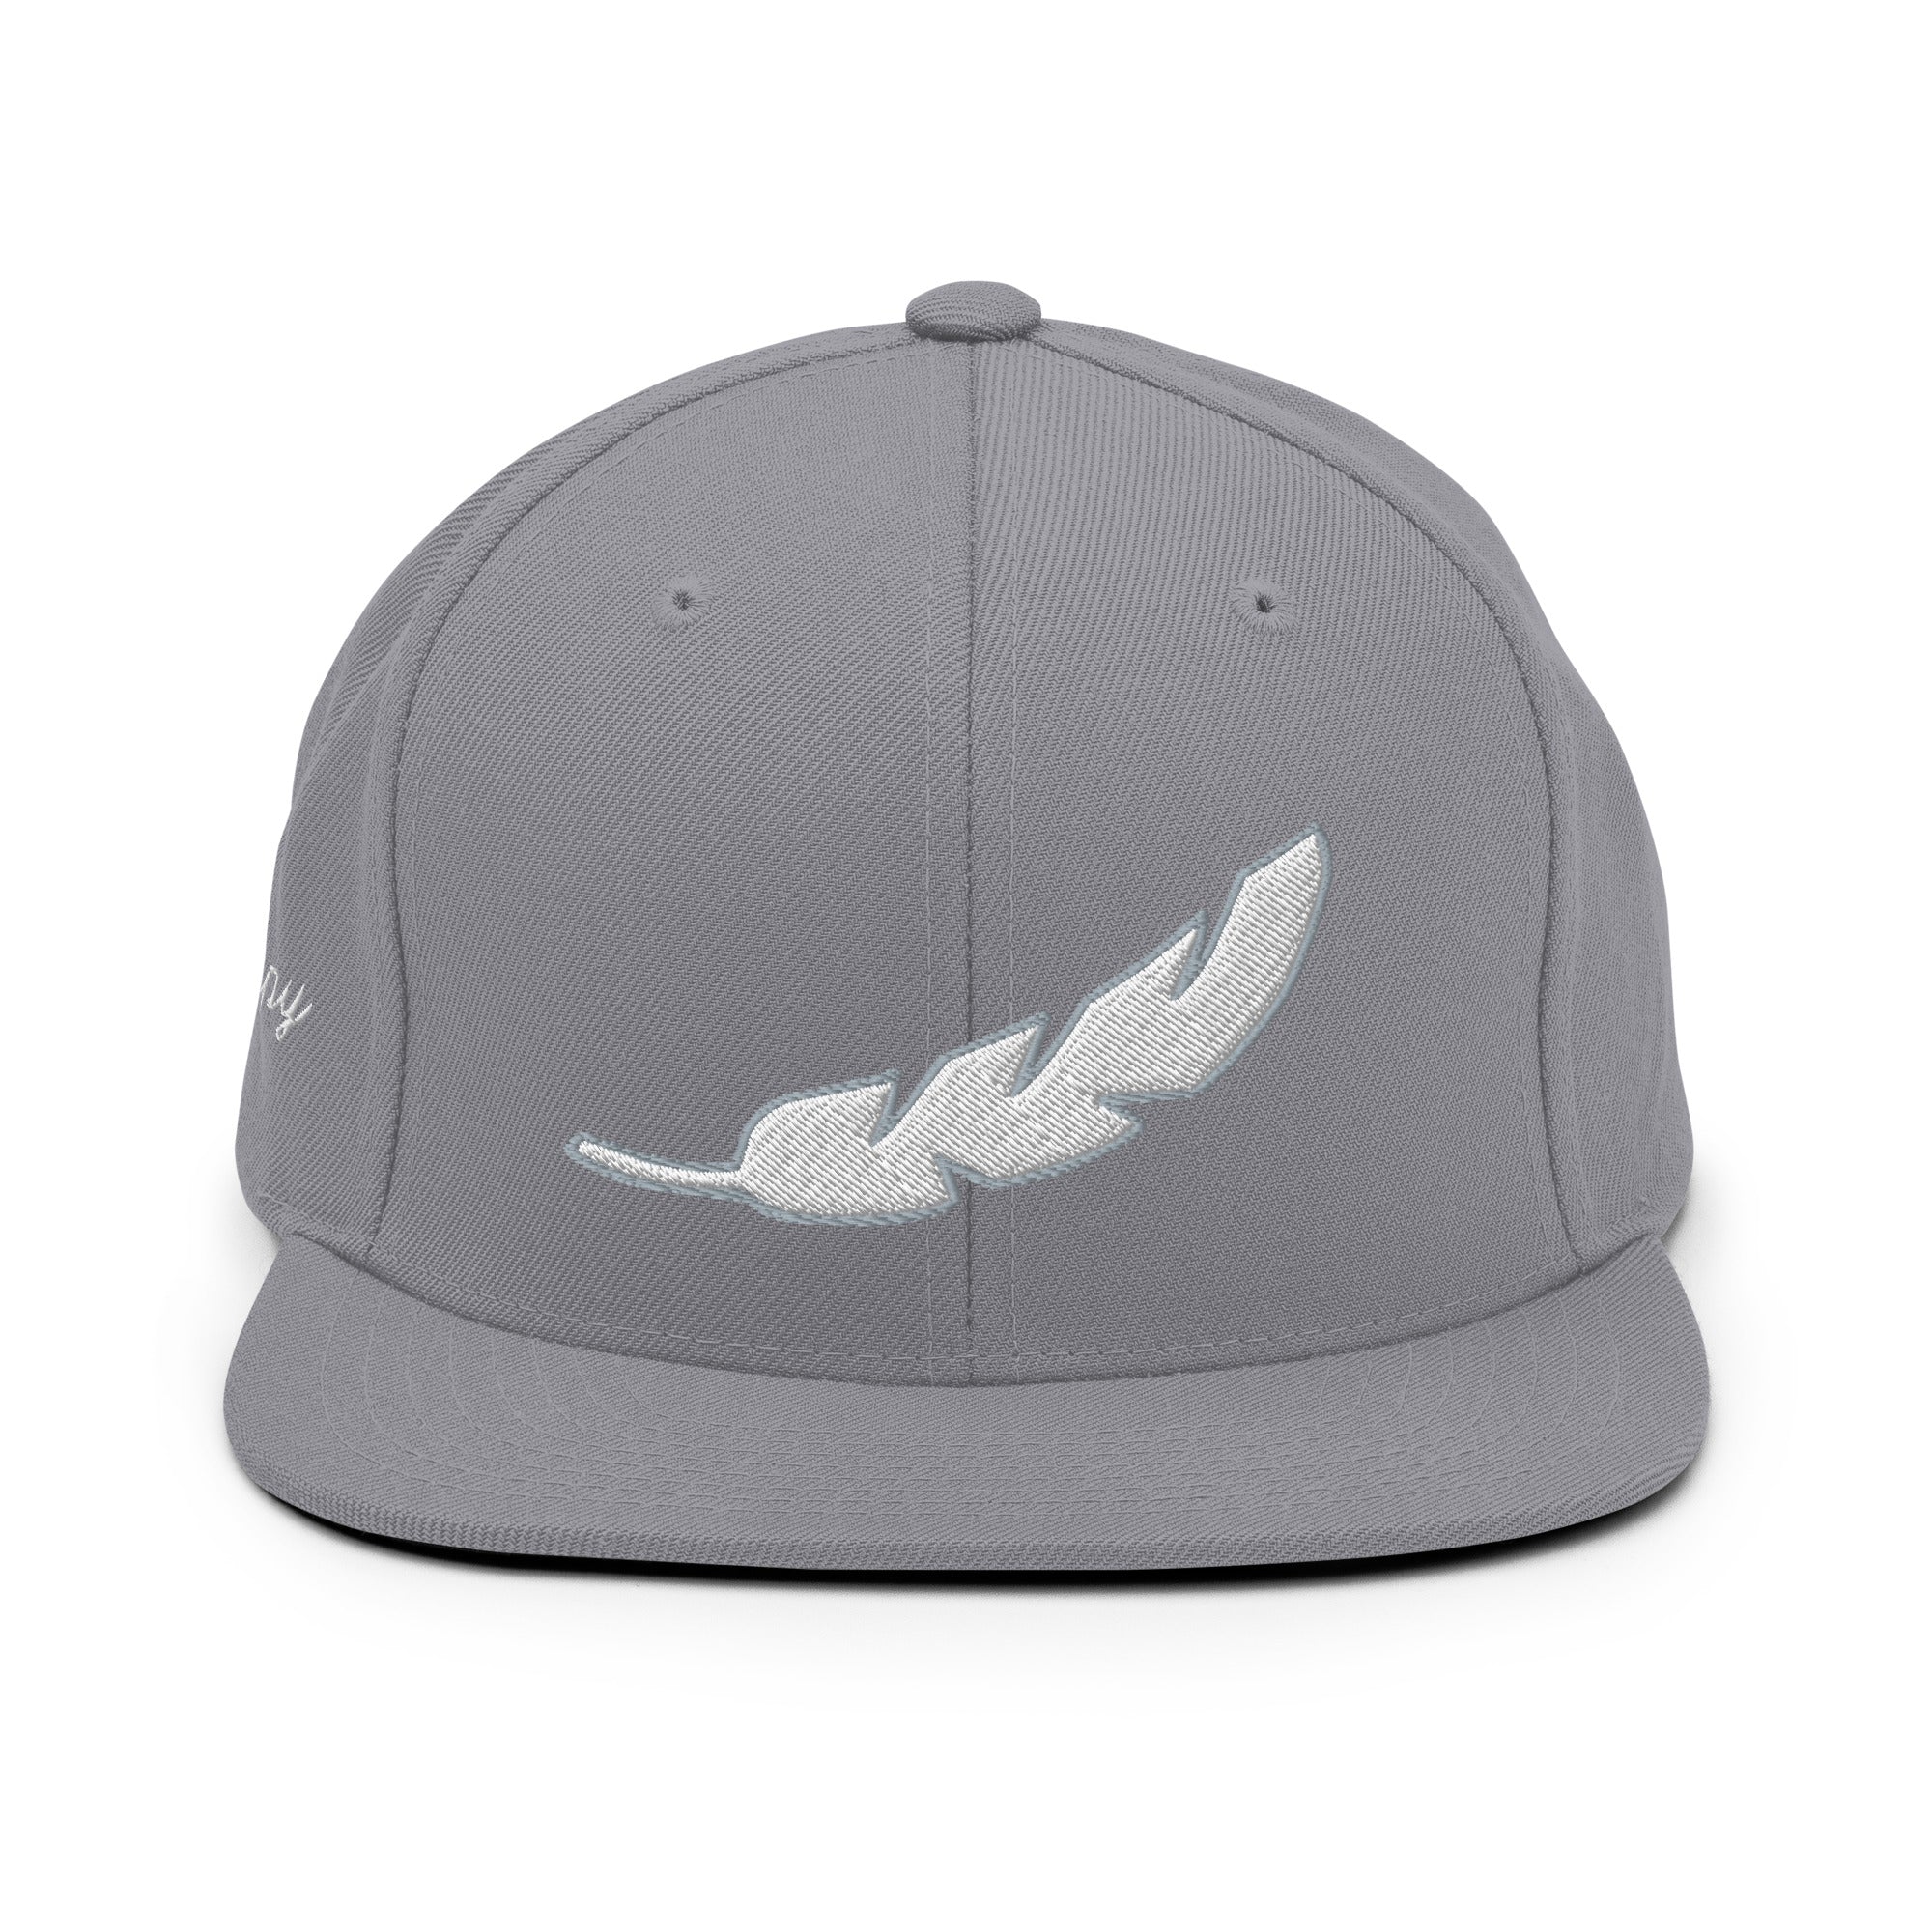 FEATHER Snapback Hat